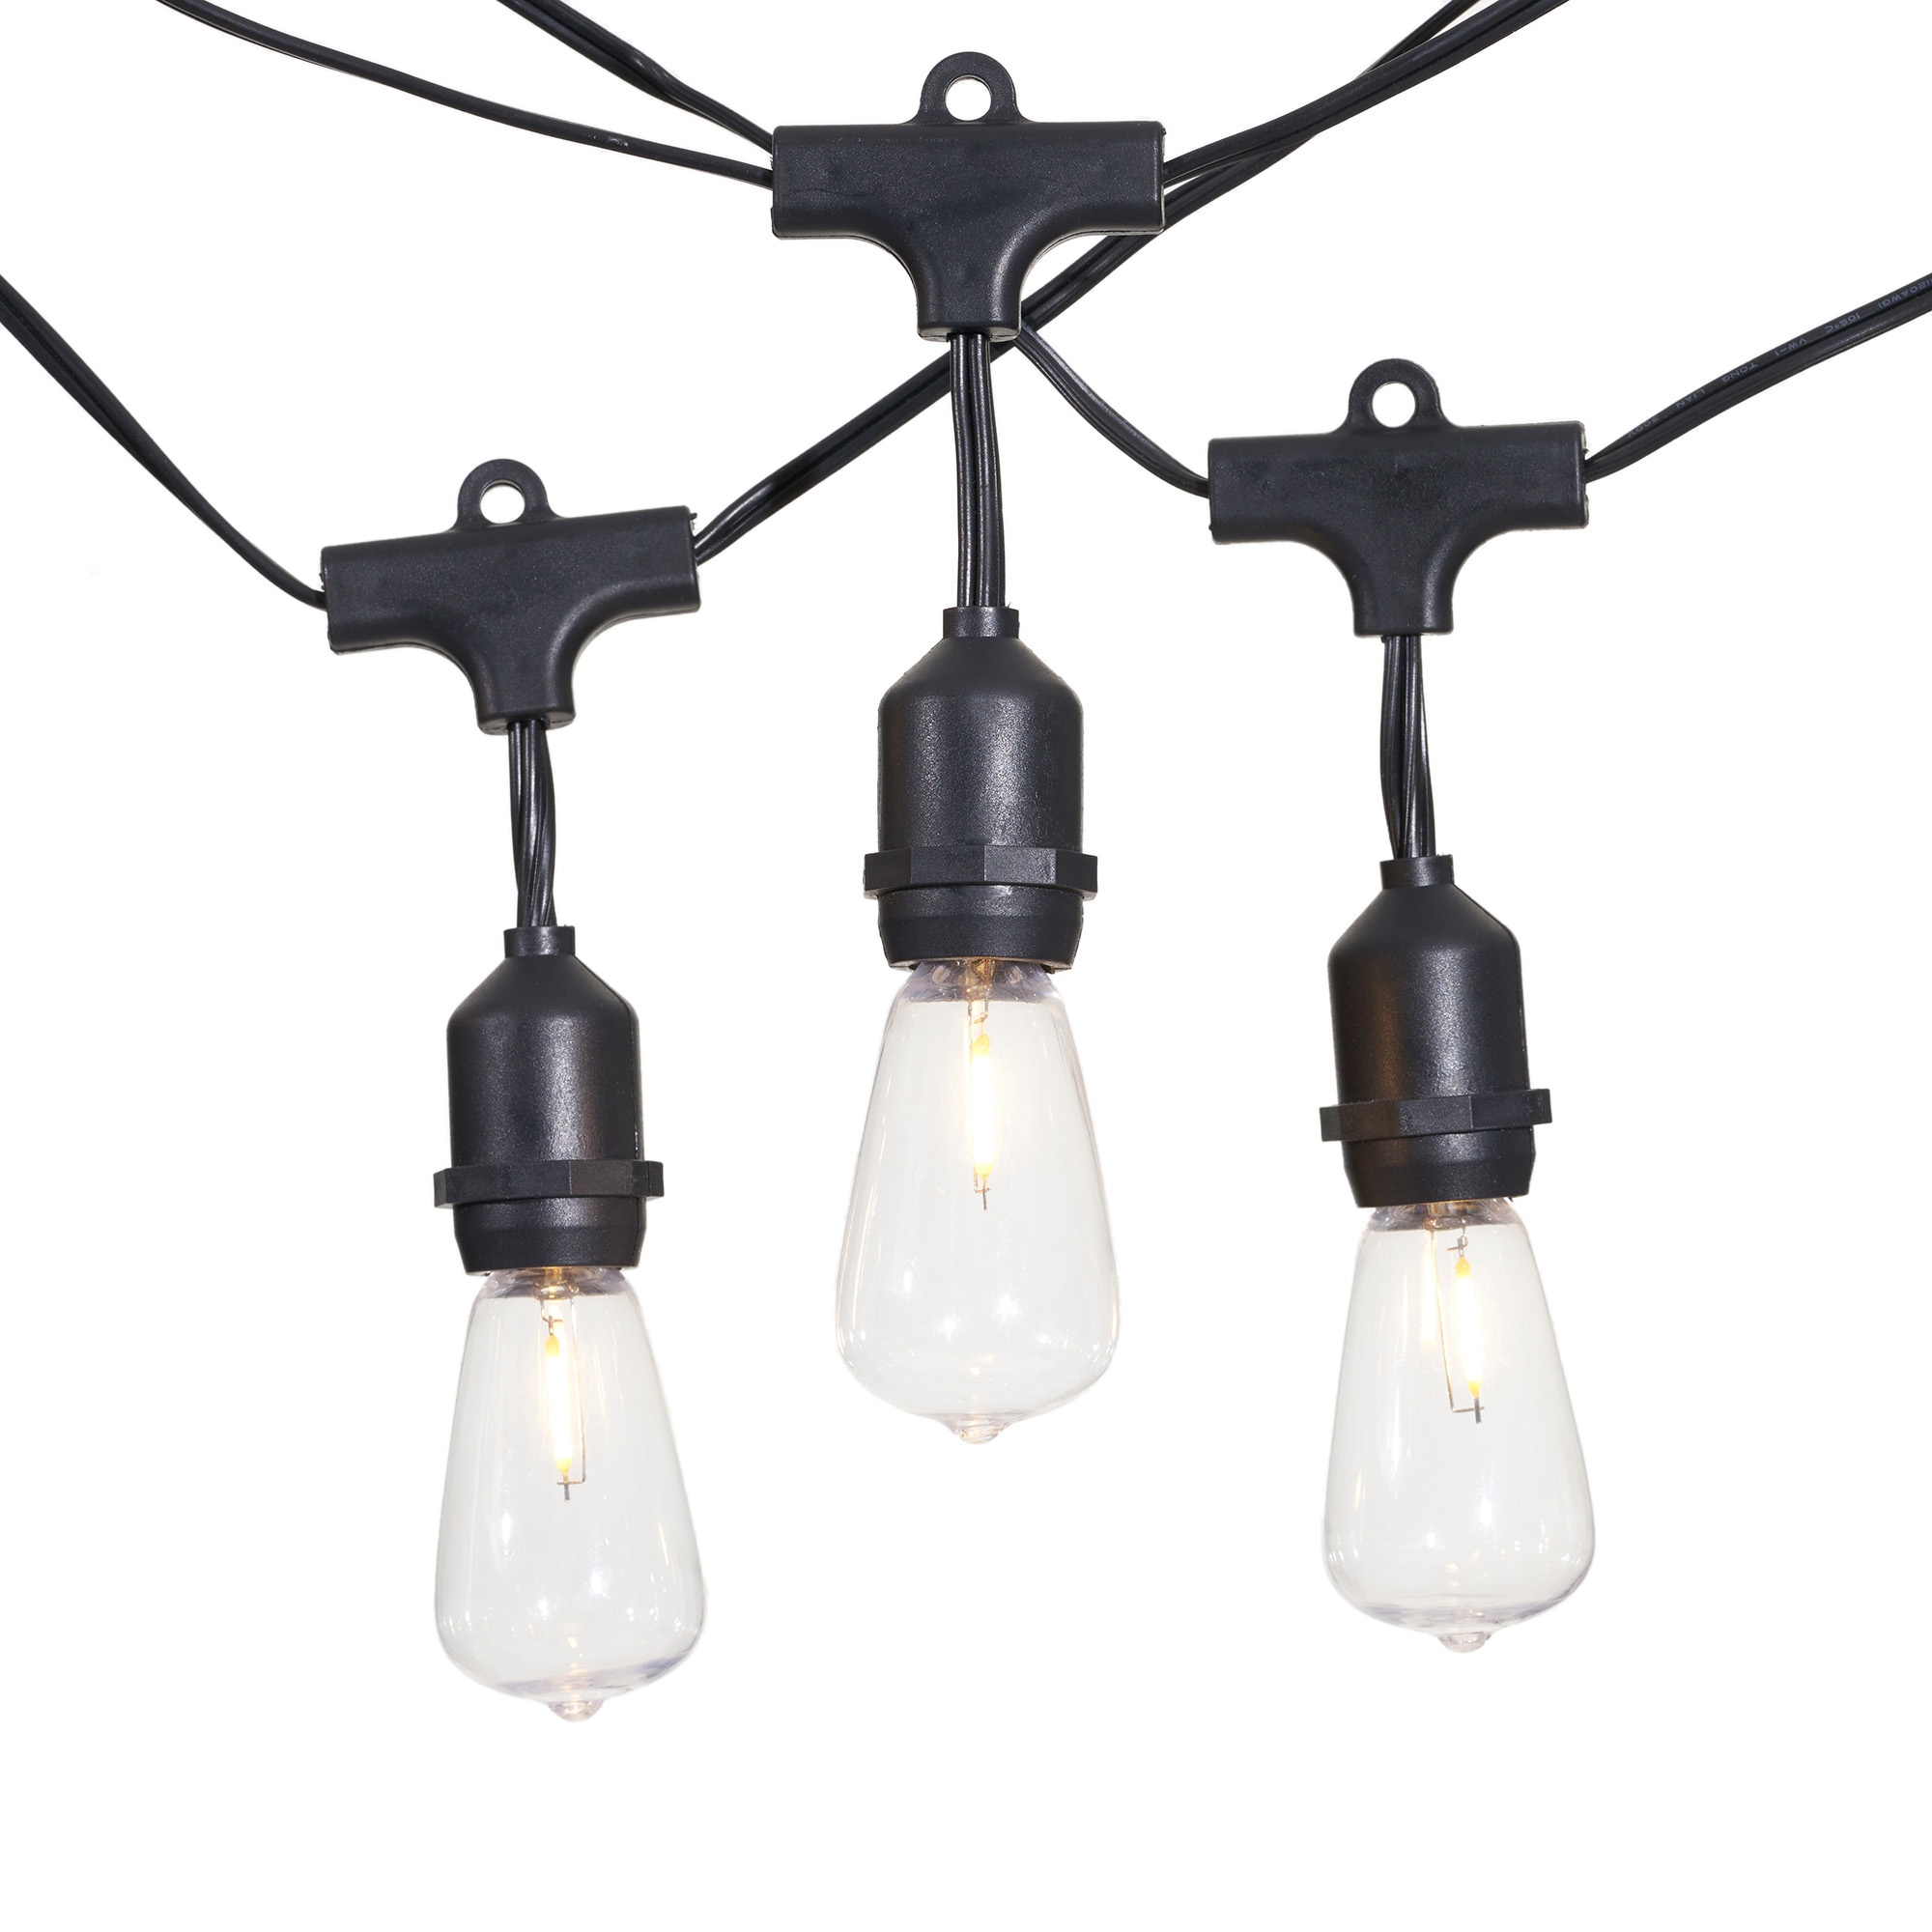 Better Homes & Gardens 15-Count Shatterproof Edison Bulb Outdoor String Lights with Black Wire - image 1 of 8